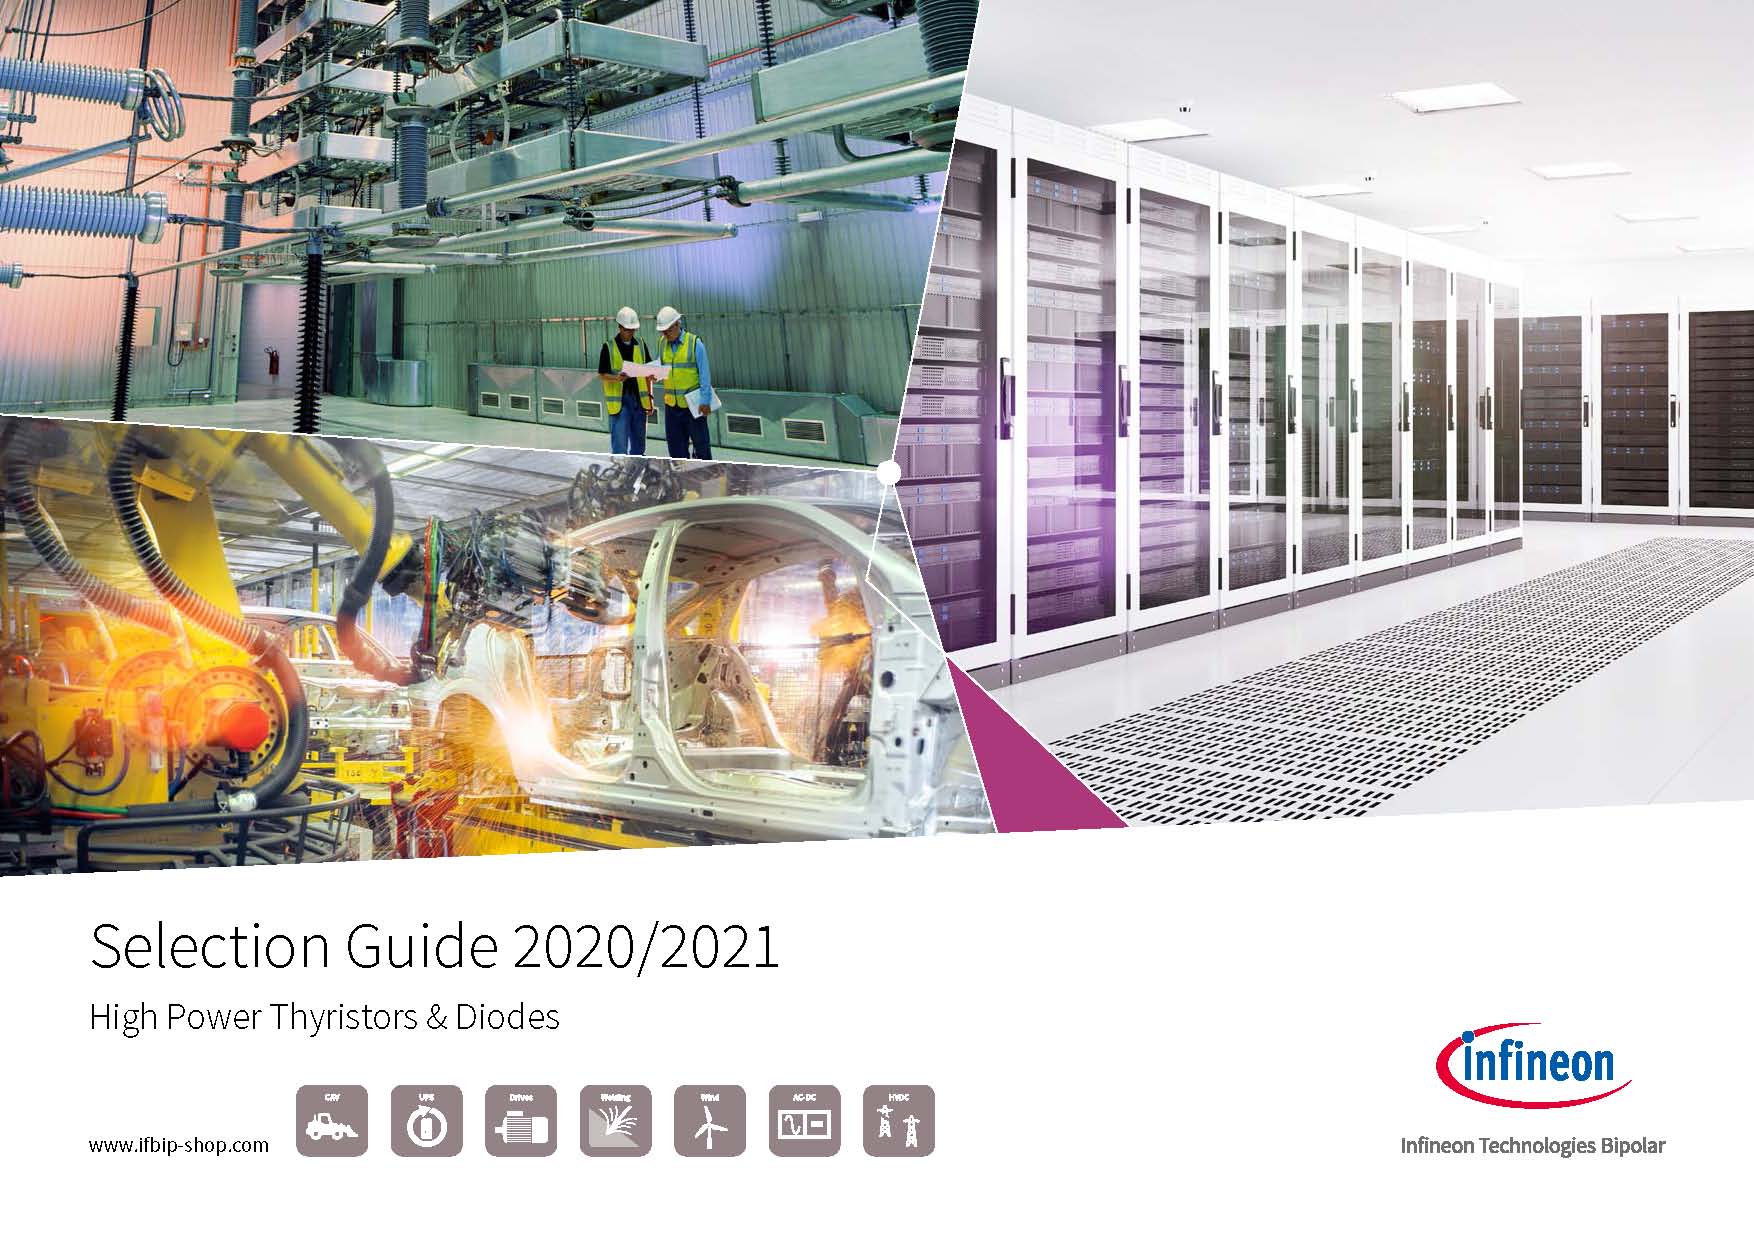 Selection Guide 2020/2021 High Power Thyristors & Diodes